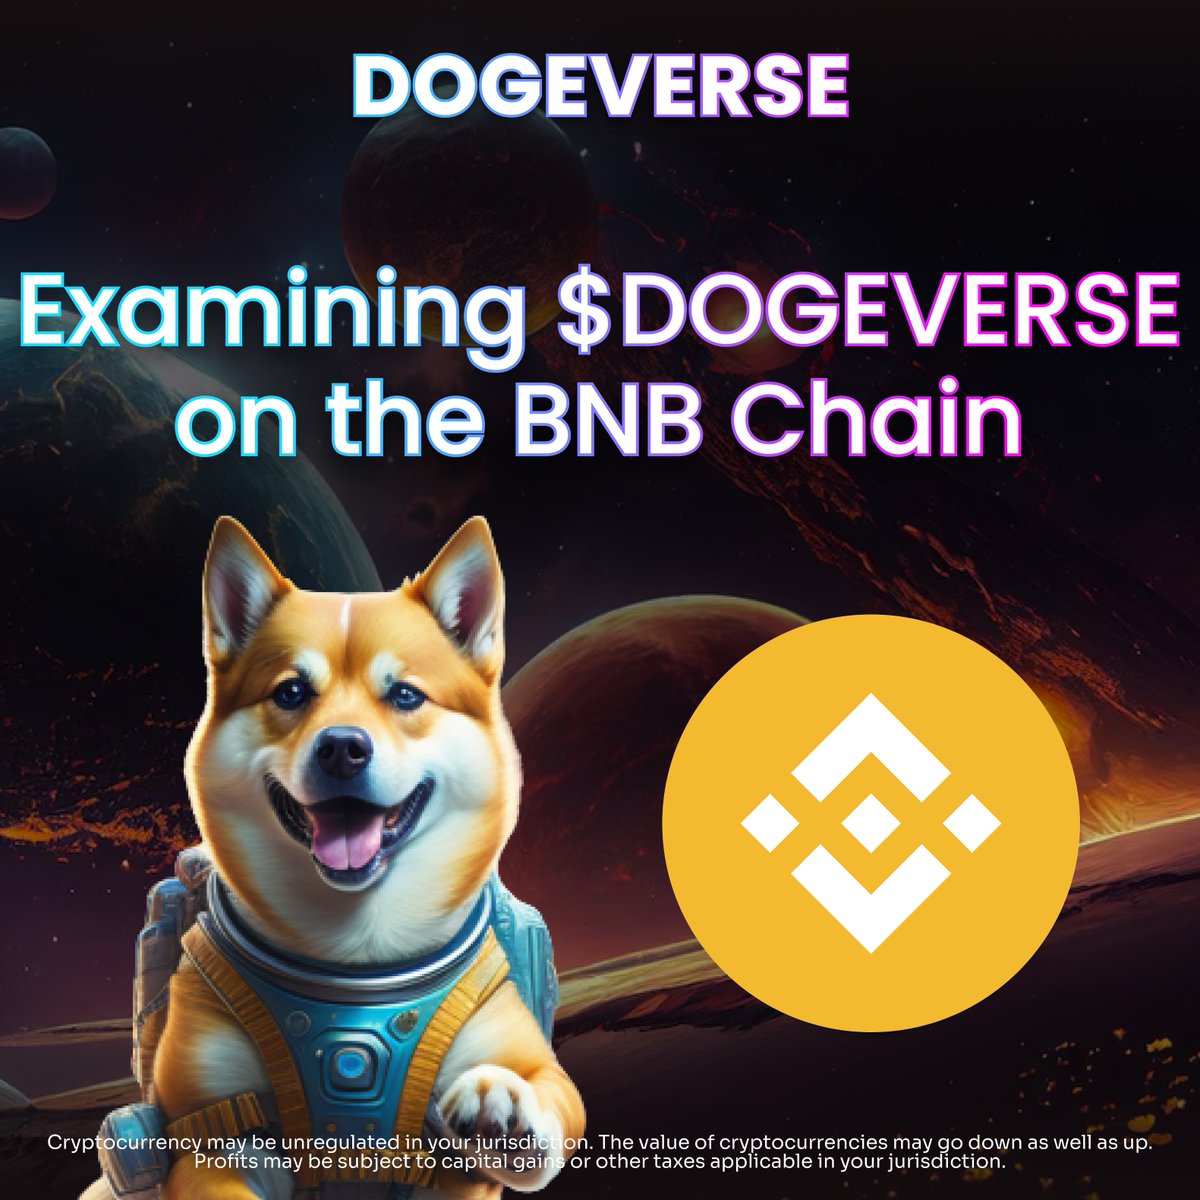 Examining $DOGEVERSE on the #BNB Chain:

Upsides:

📈 Increased Market Liquidity
🔄 Access to Interconnected Chains
⚡ Speedier Transaction Processing

Downsides:

🎯 Worries about Centralization
🔒 Constrained Decentralization
🌐 Dependency on Ecosystem